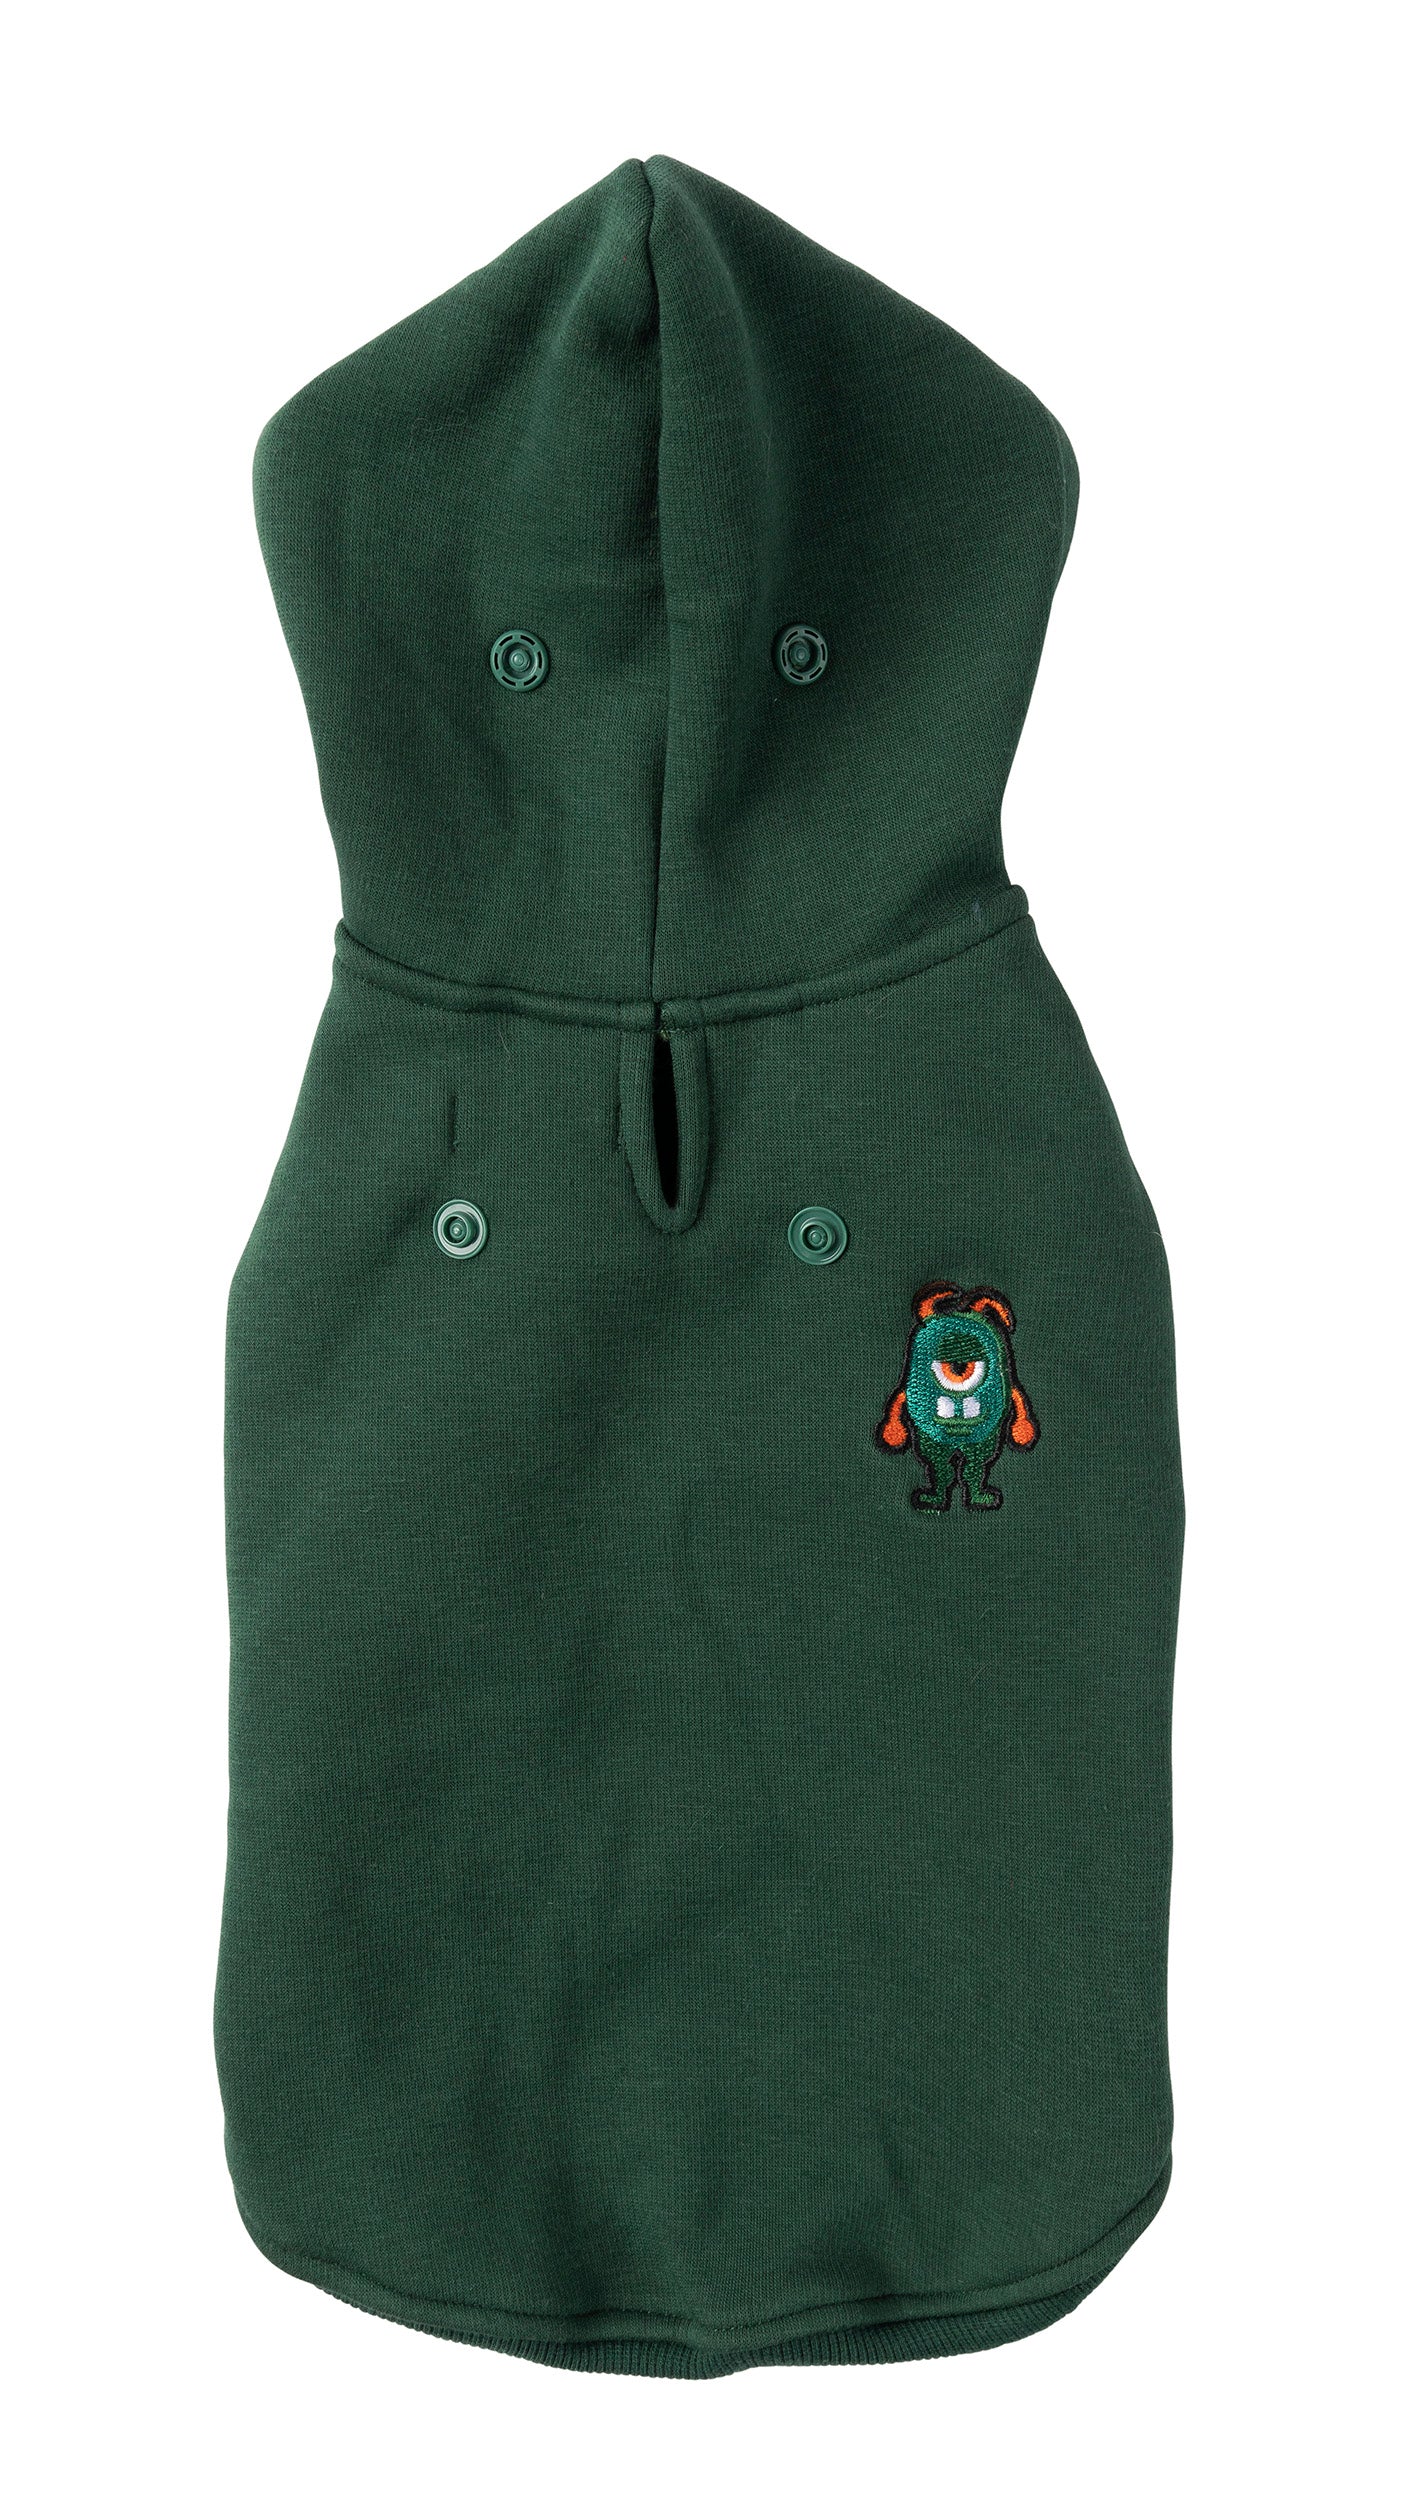 The Yardsters Hoodie - Green - SPECIAL OFFER!